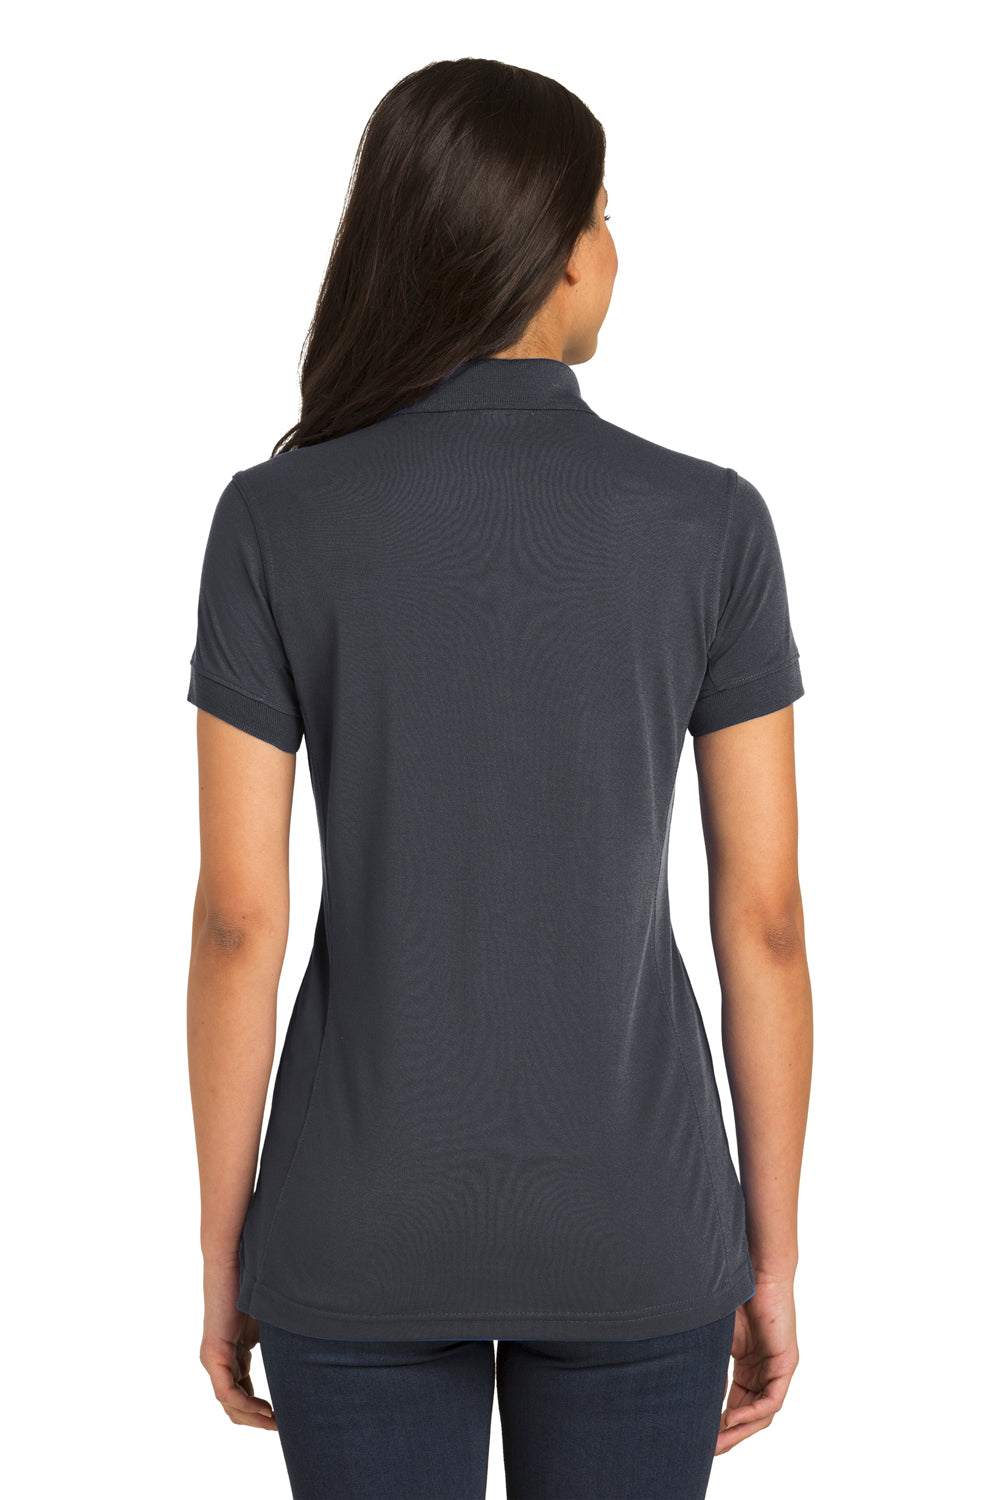 Port Authority L567 Womens 5-in-1 Performance Moisture Wicking Short Sleeve Polo Shirt Slate Grey Back